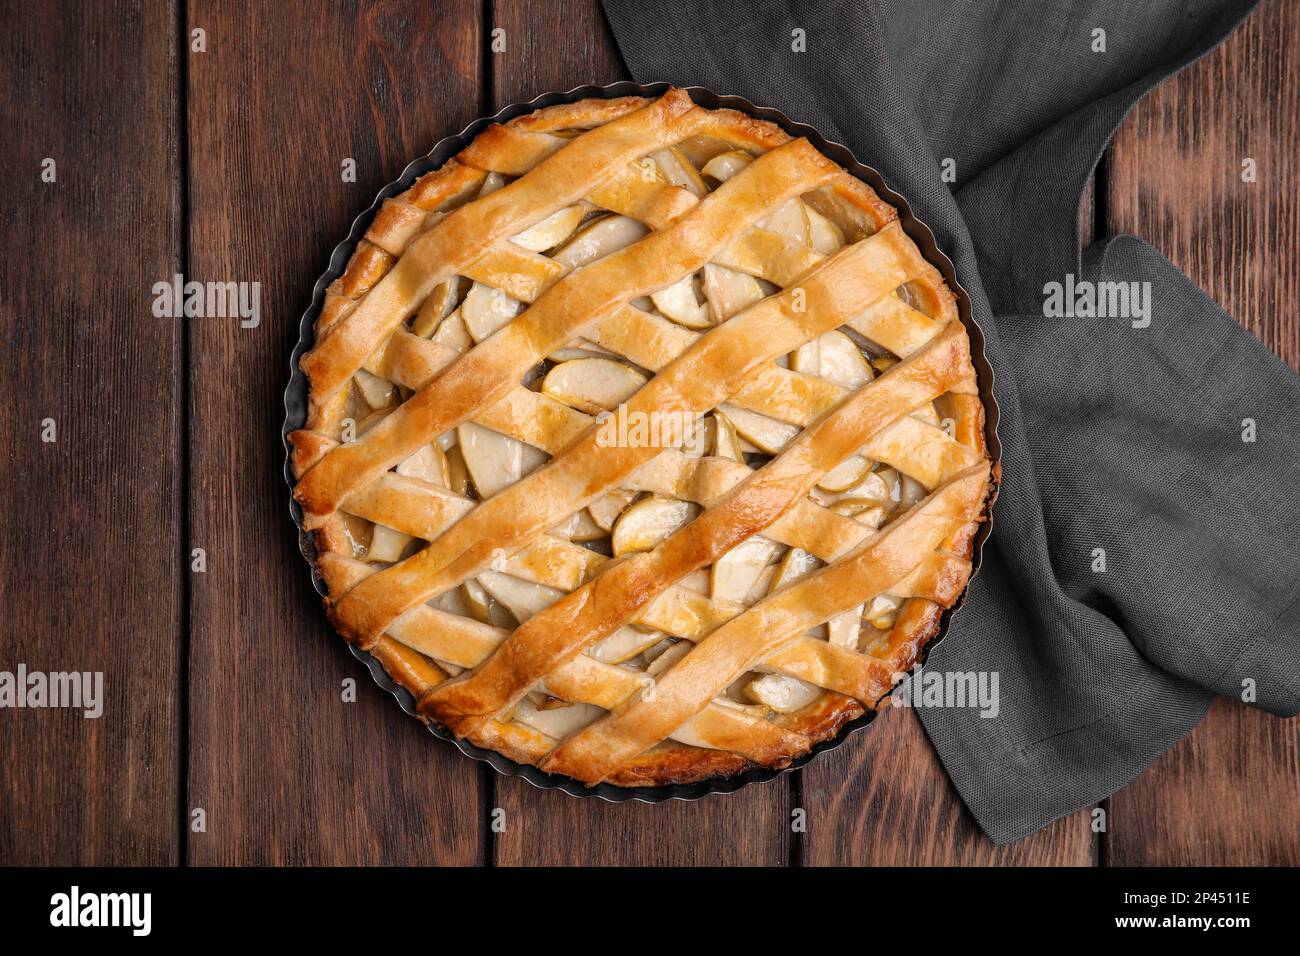 Delicious traditional apple pie on wooden table, top view Stock Photo